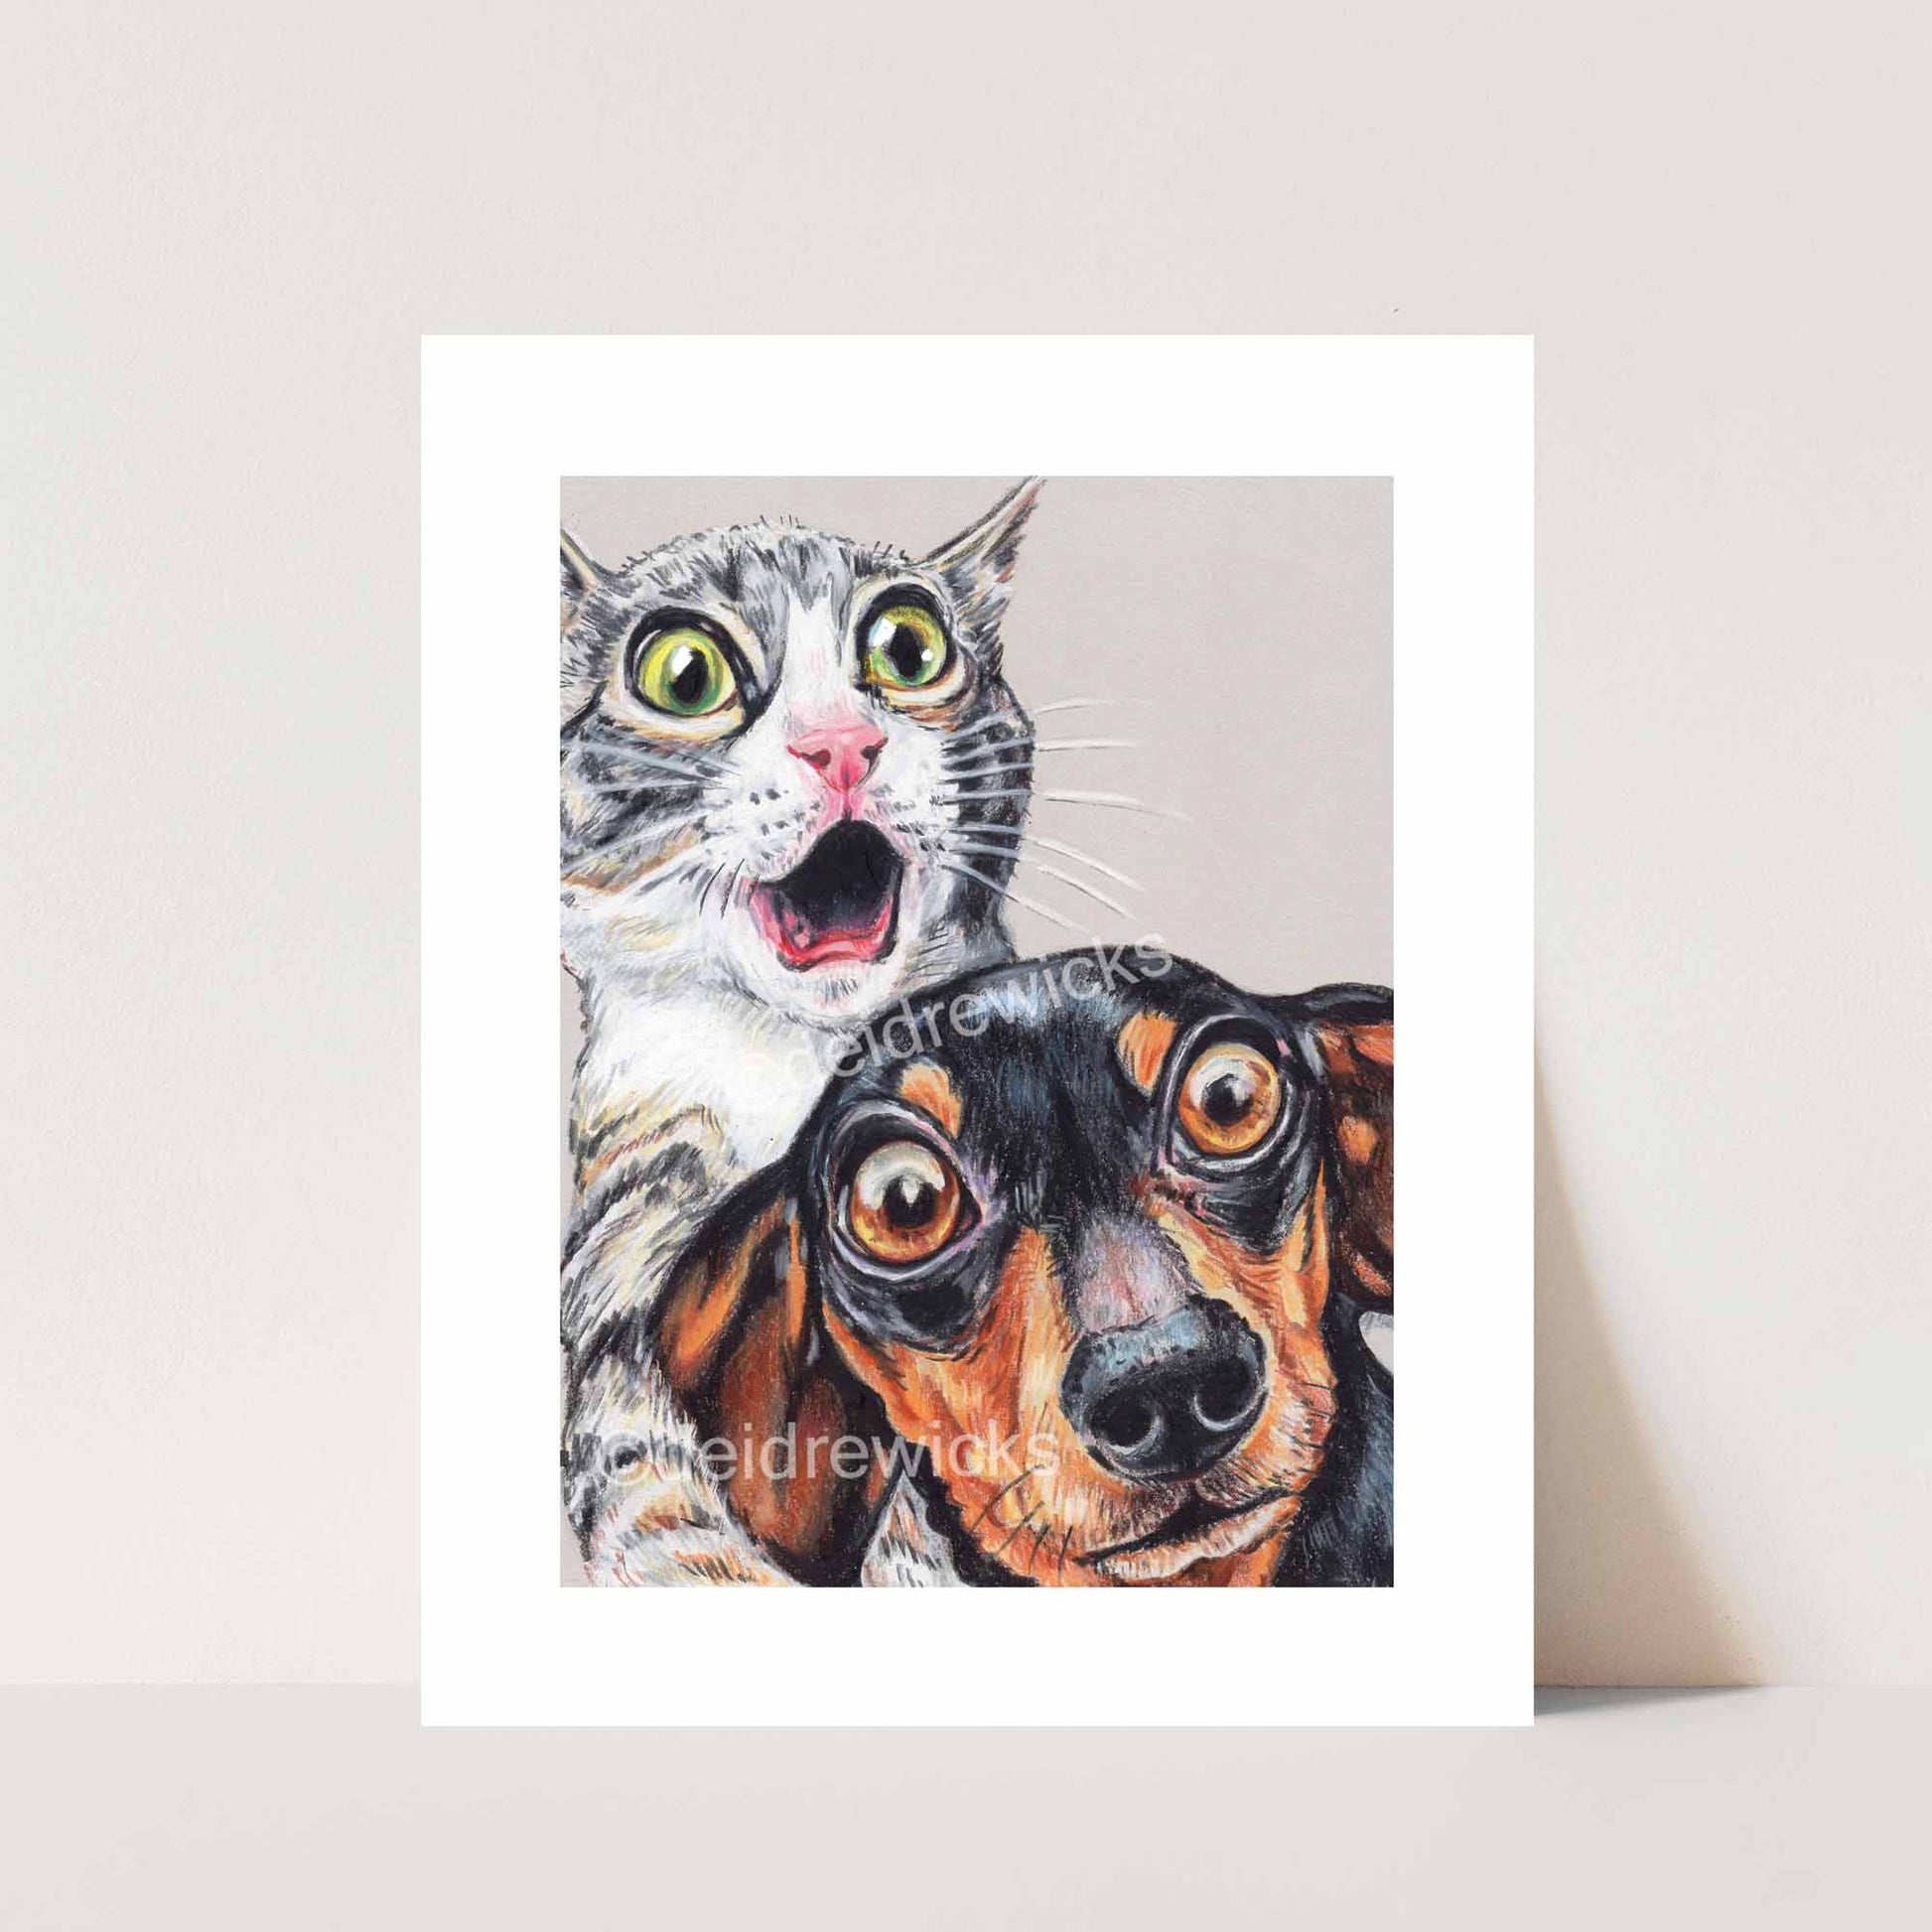 Crayon drawing print of an adorably shocked grey tabby cat and dachshund dog by artist Deidre Wicks